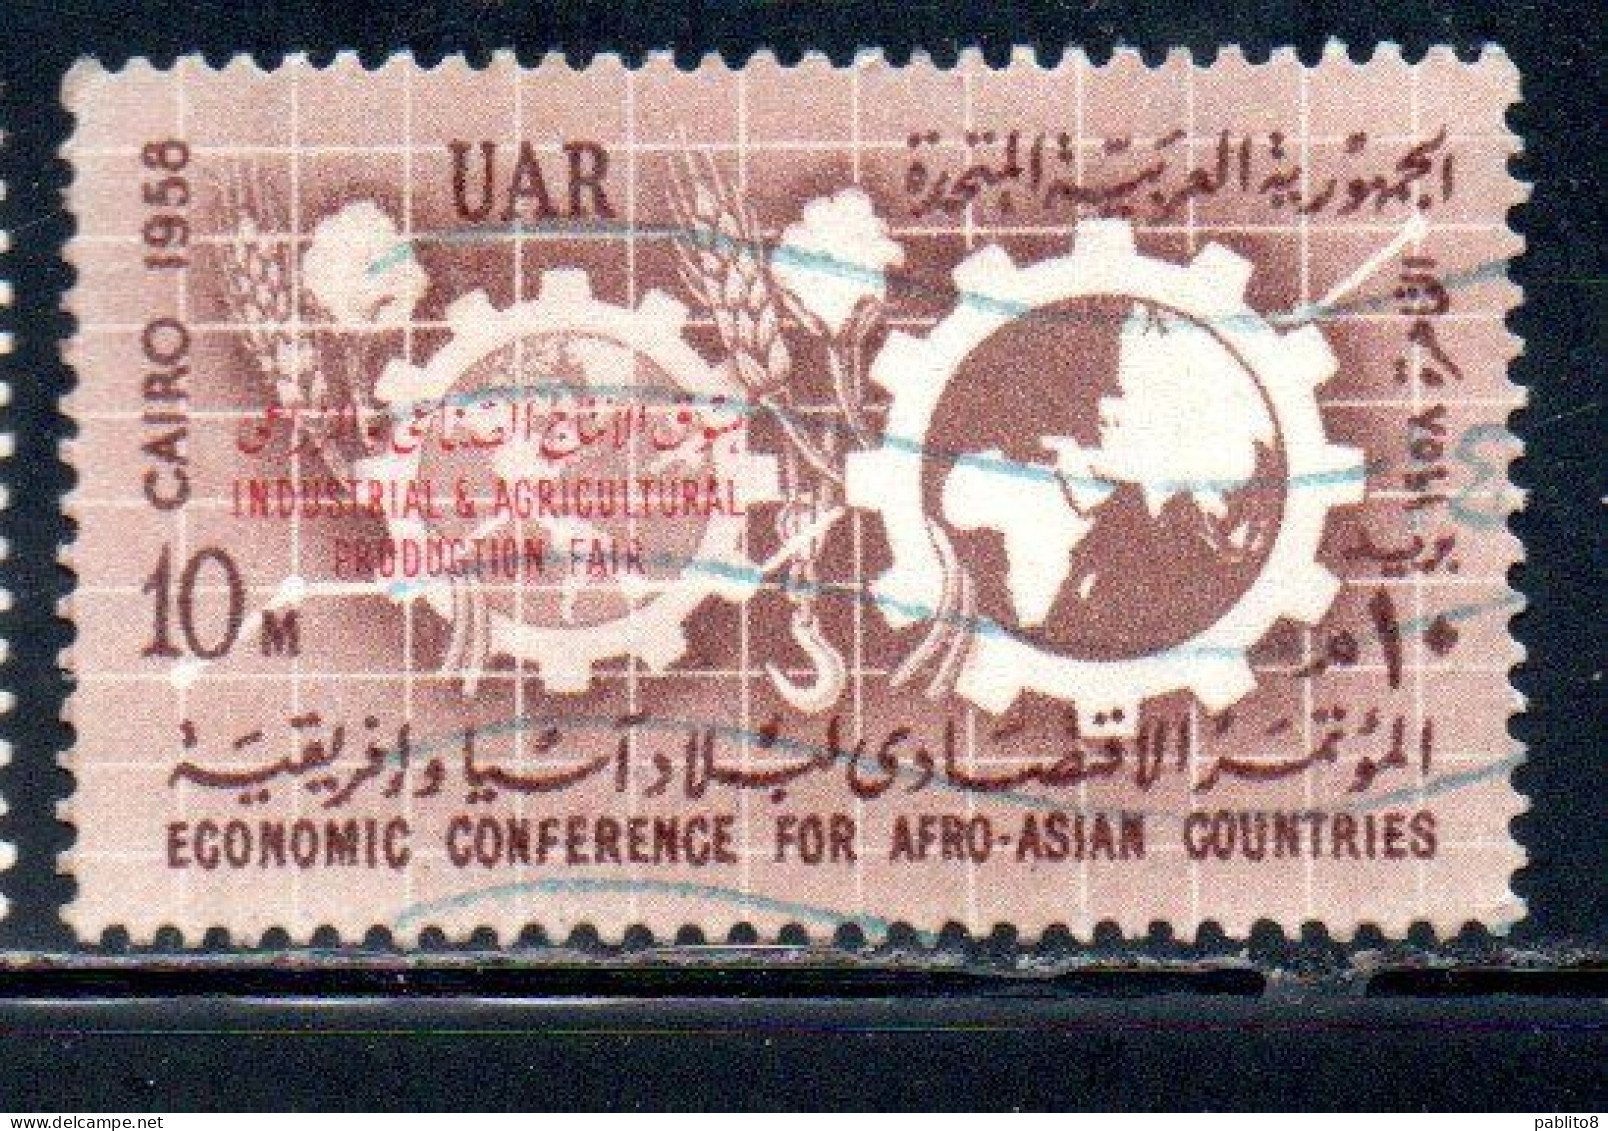 UAR EGYPT EGITTO 1958 OVERPRINTED INDUSTRIAL AND AGRICULTURAL PRODUCTION FAIR CAIRO 10m USED USATO OBLITERE' - Usados